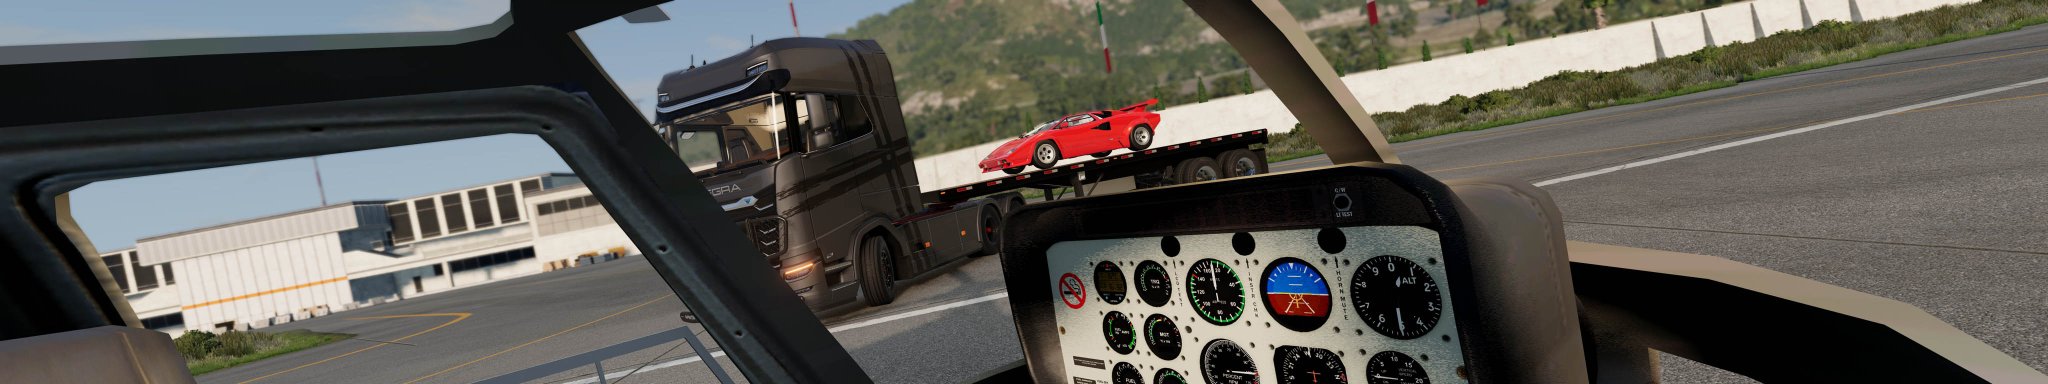 0 BeamNG HELICOPTOR at ITALY AIRPORT with LAMBO COUNTACH copy.jpg